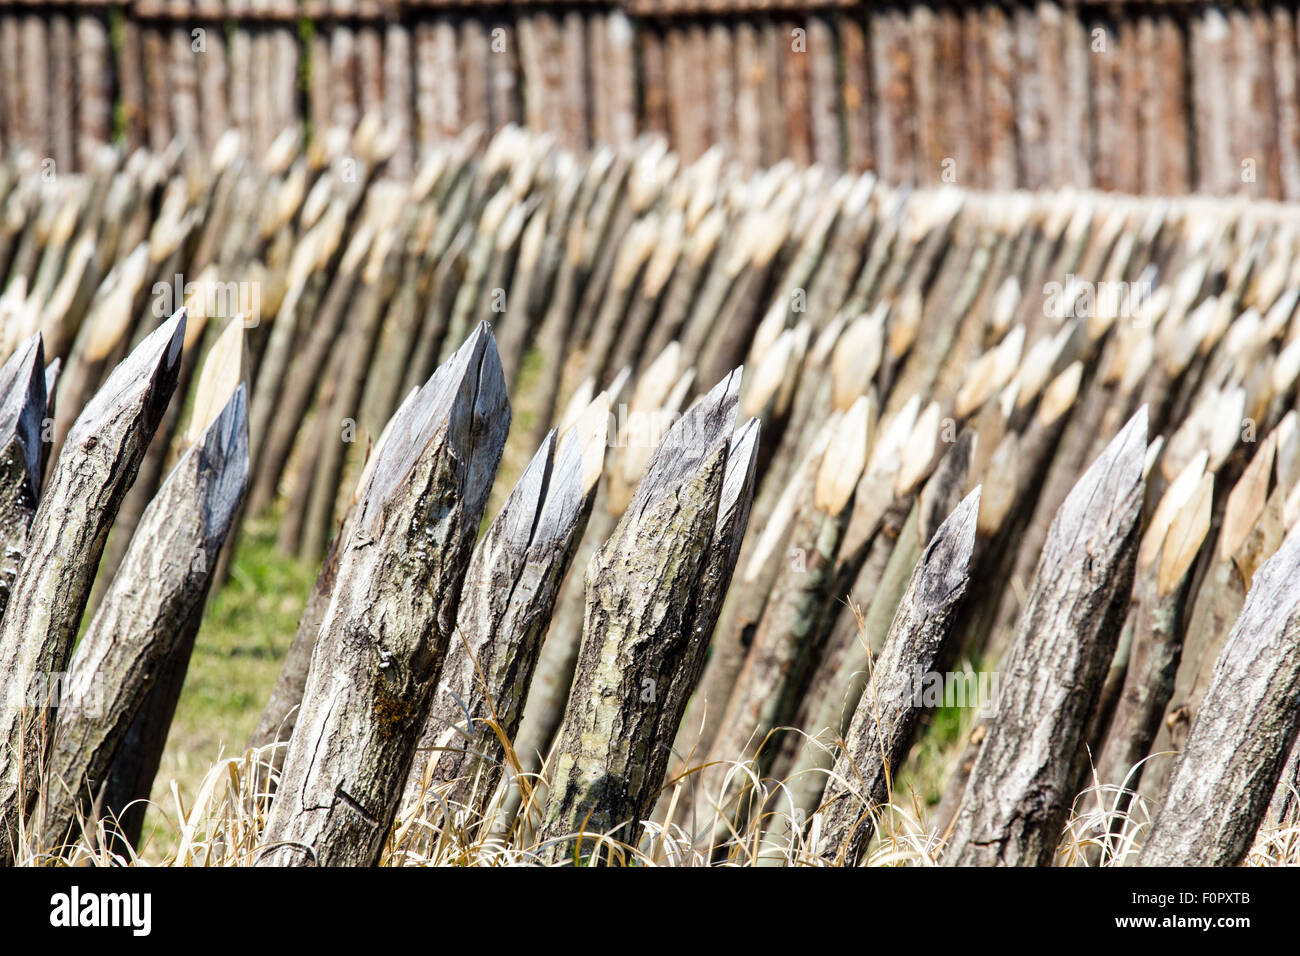 Japan, Yoshinogari Historical Park. Reconstructed iron age settlement. Sharpened stakes in the ground to act as defensive barrier. Selective focus. Stock Photo